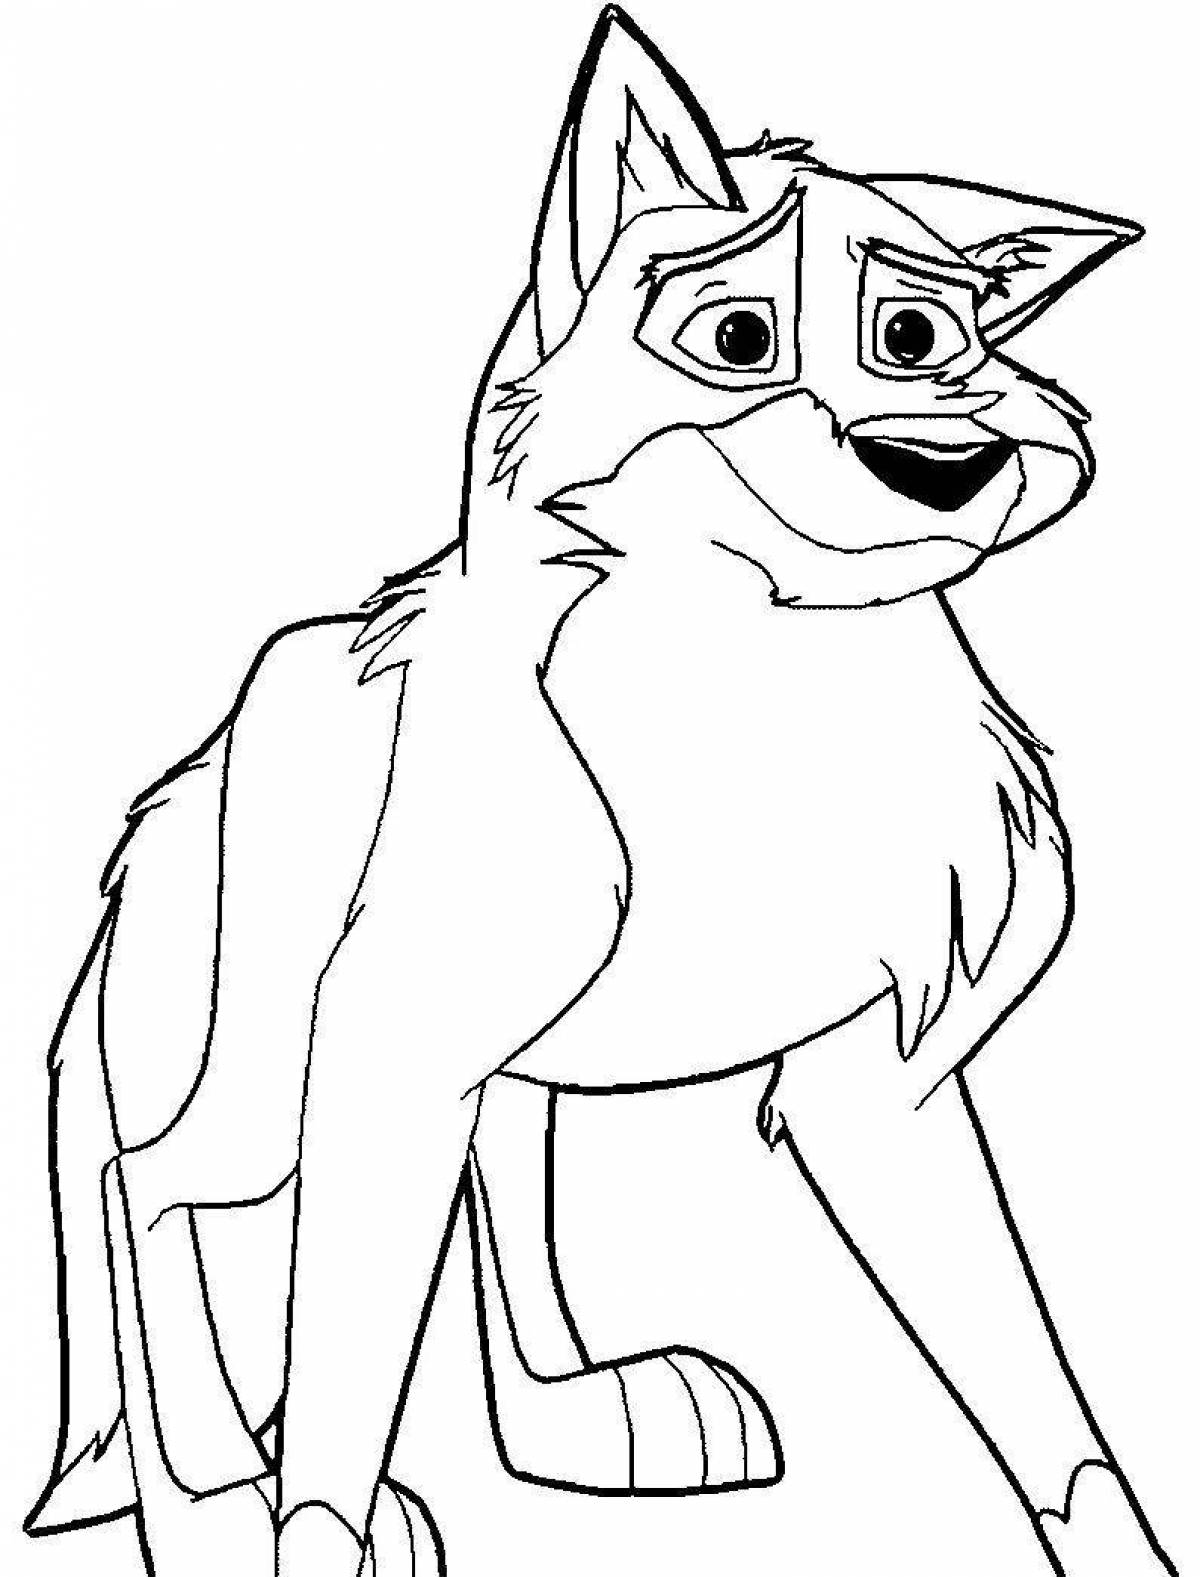 Fat cartoon wolf coloring page